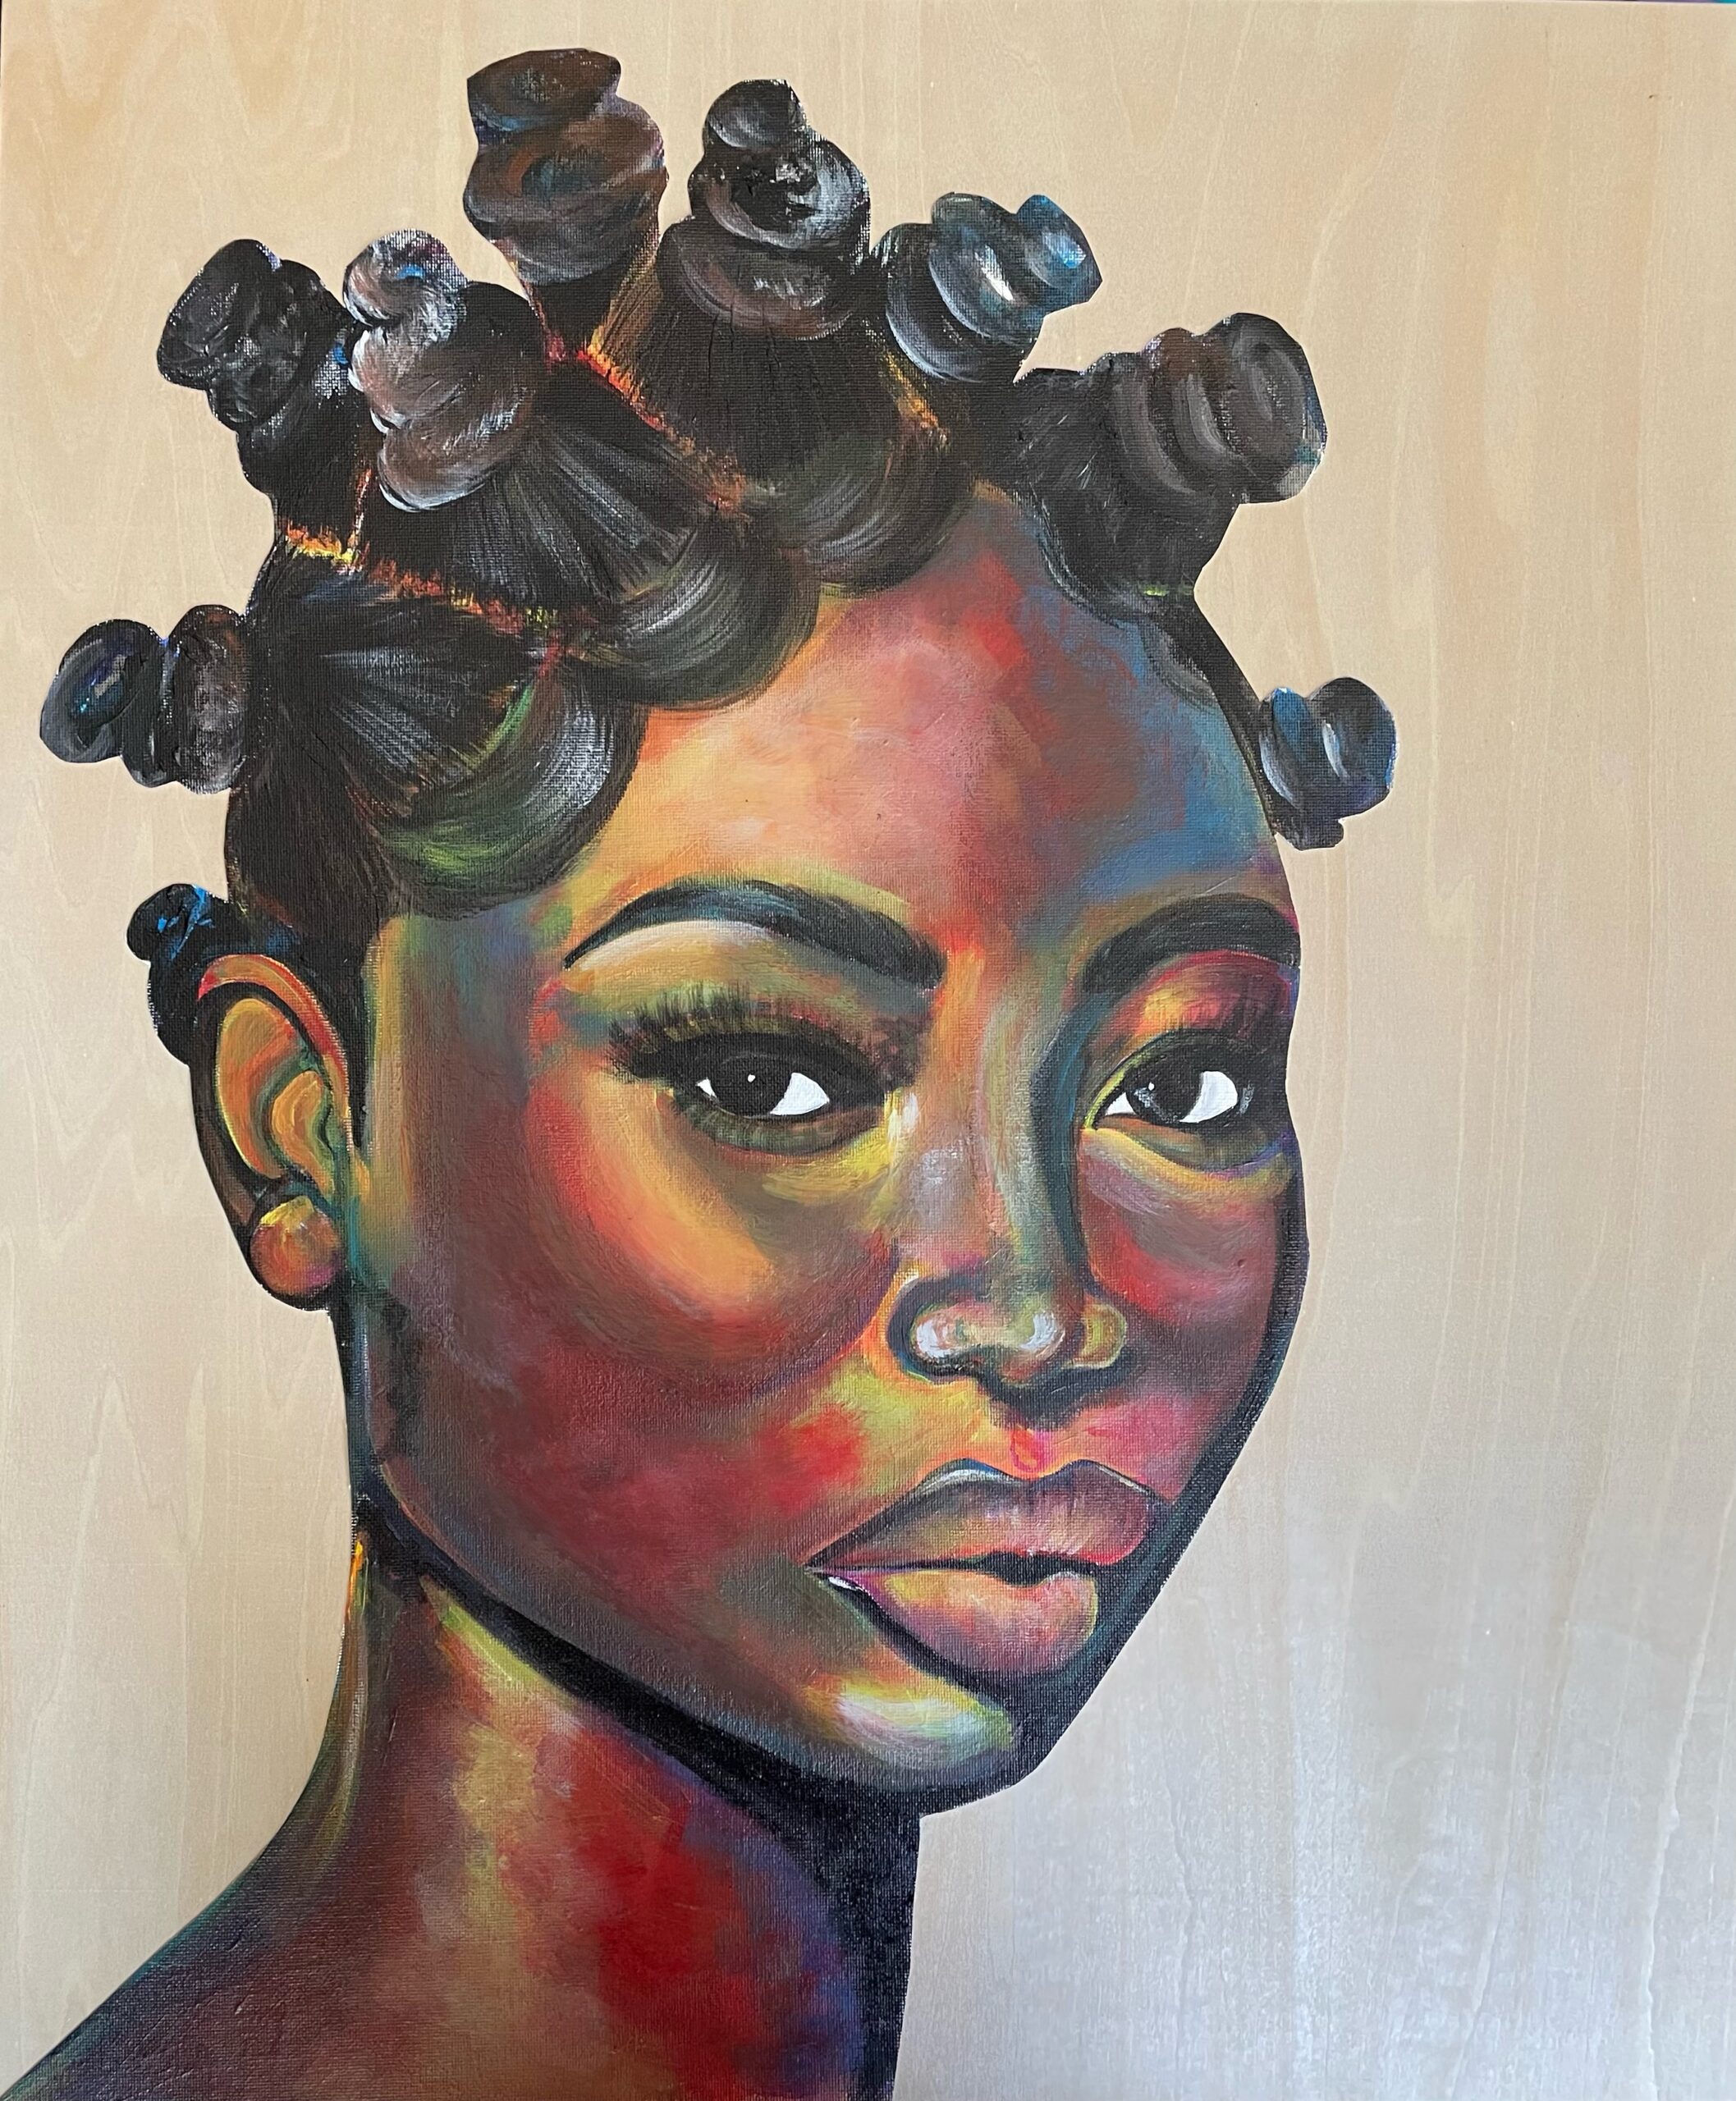 A portrait of a black woman showcases her facial features and detailed Bantu knots hairstyle